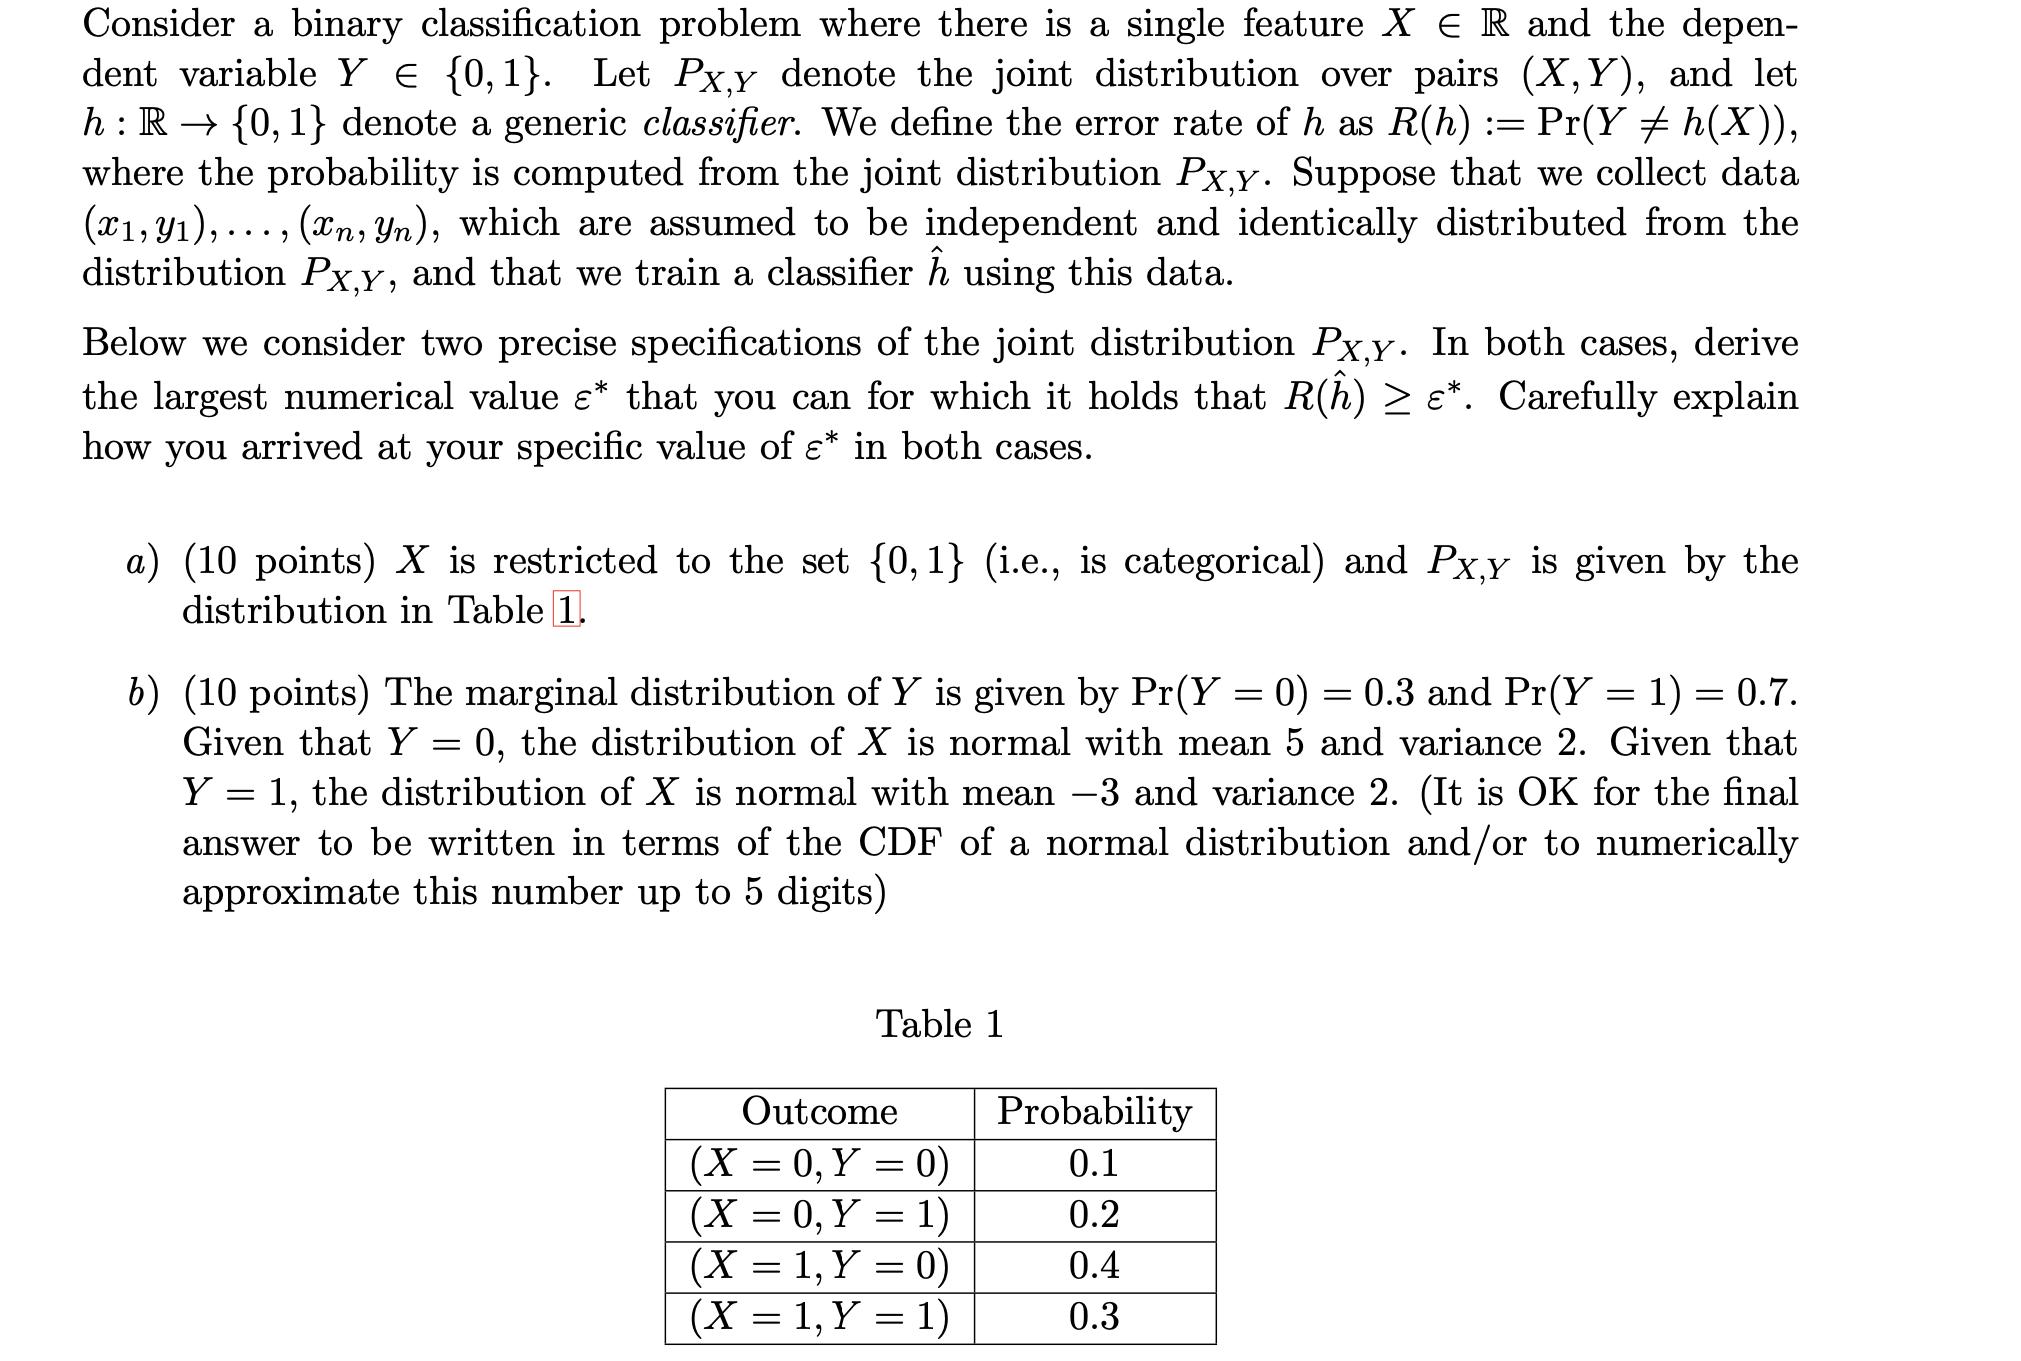 Consider a binary classification problem where there is a single feature X ER and the depen- dent variable Y